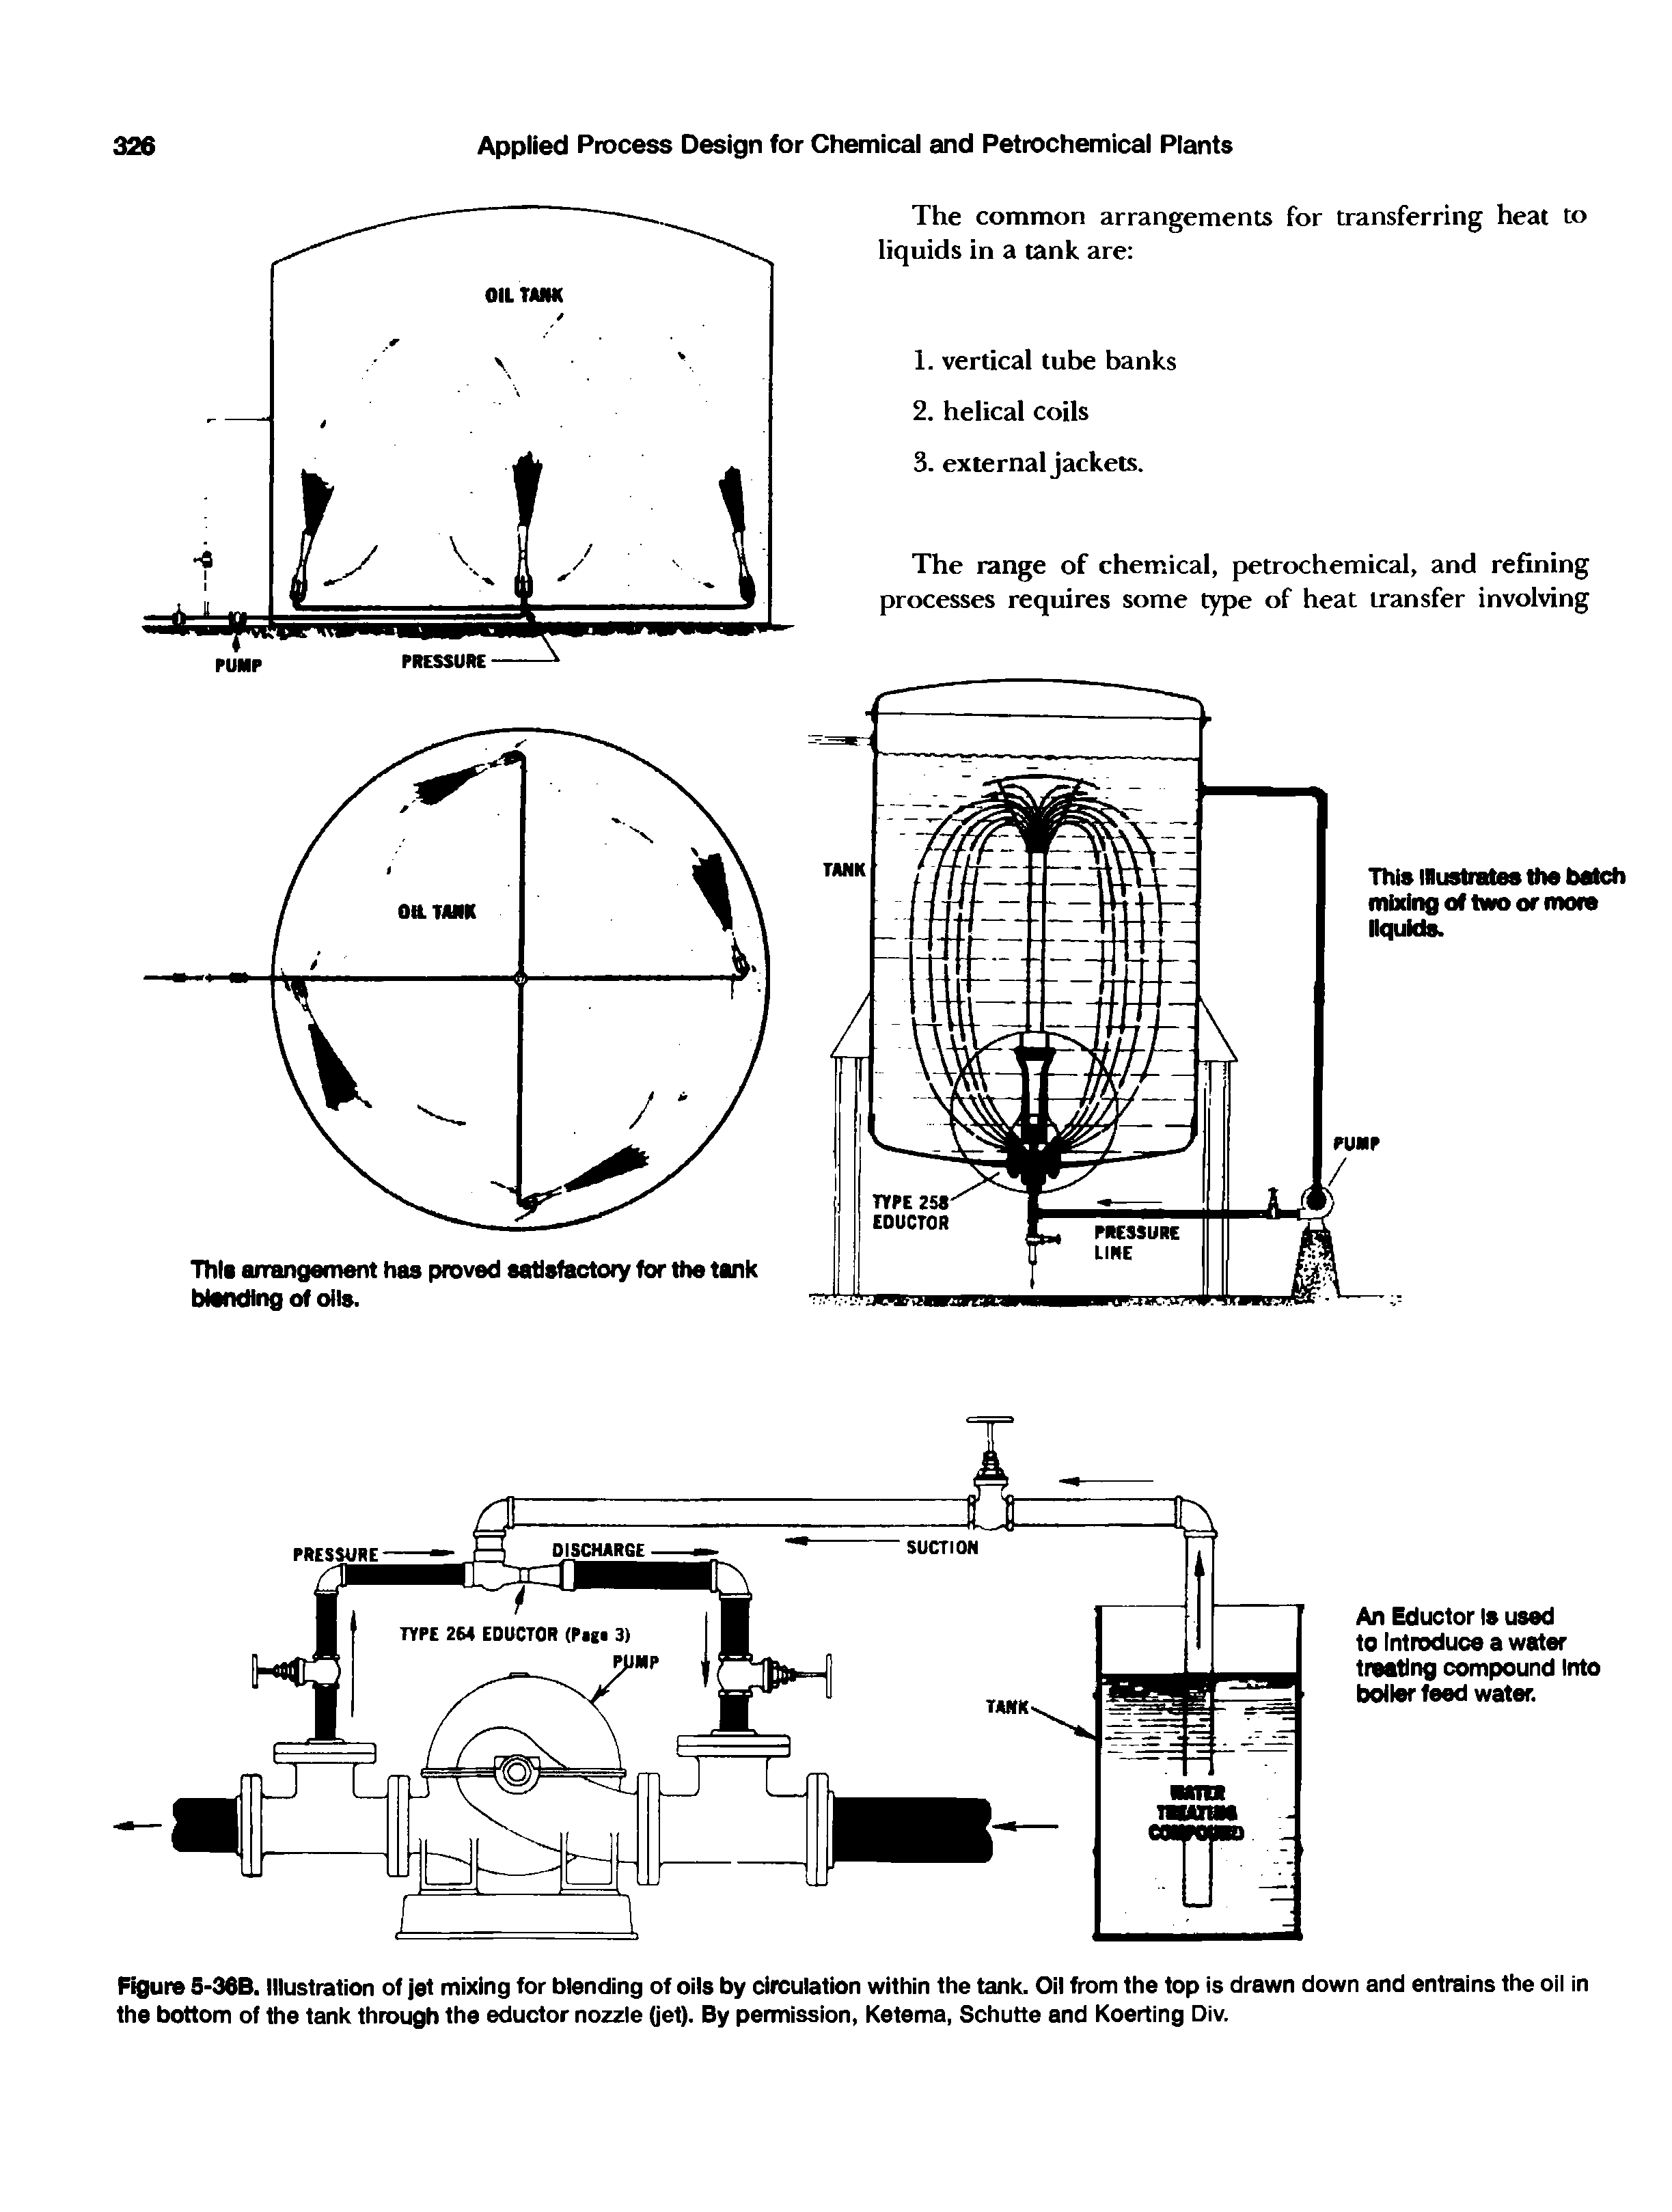 Figure 5-36B. Illustration of jet mixing for blending of oils by circulation within the tank. Oil from the top is drawn down and entrains the oil in the bottom of the tank through the eductor nozzle Get). By permission, Ketema, Schutte and Koerting Div.